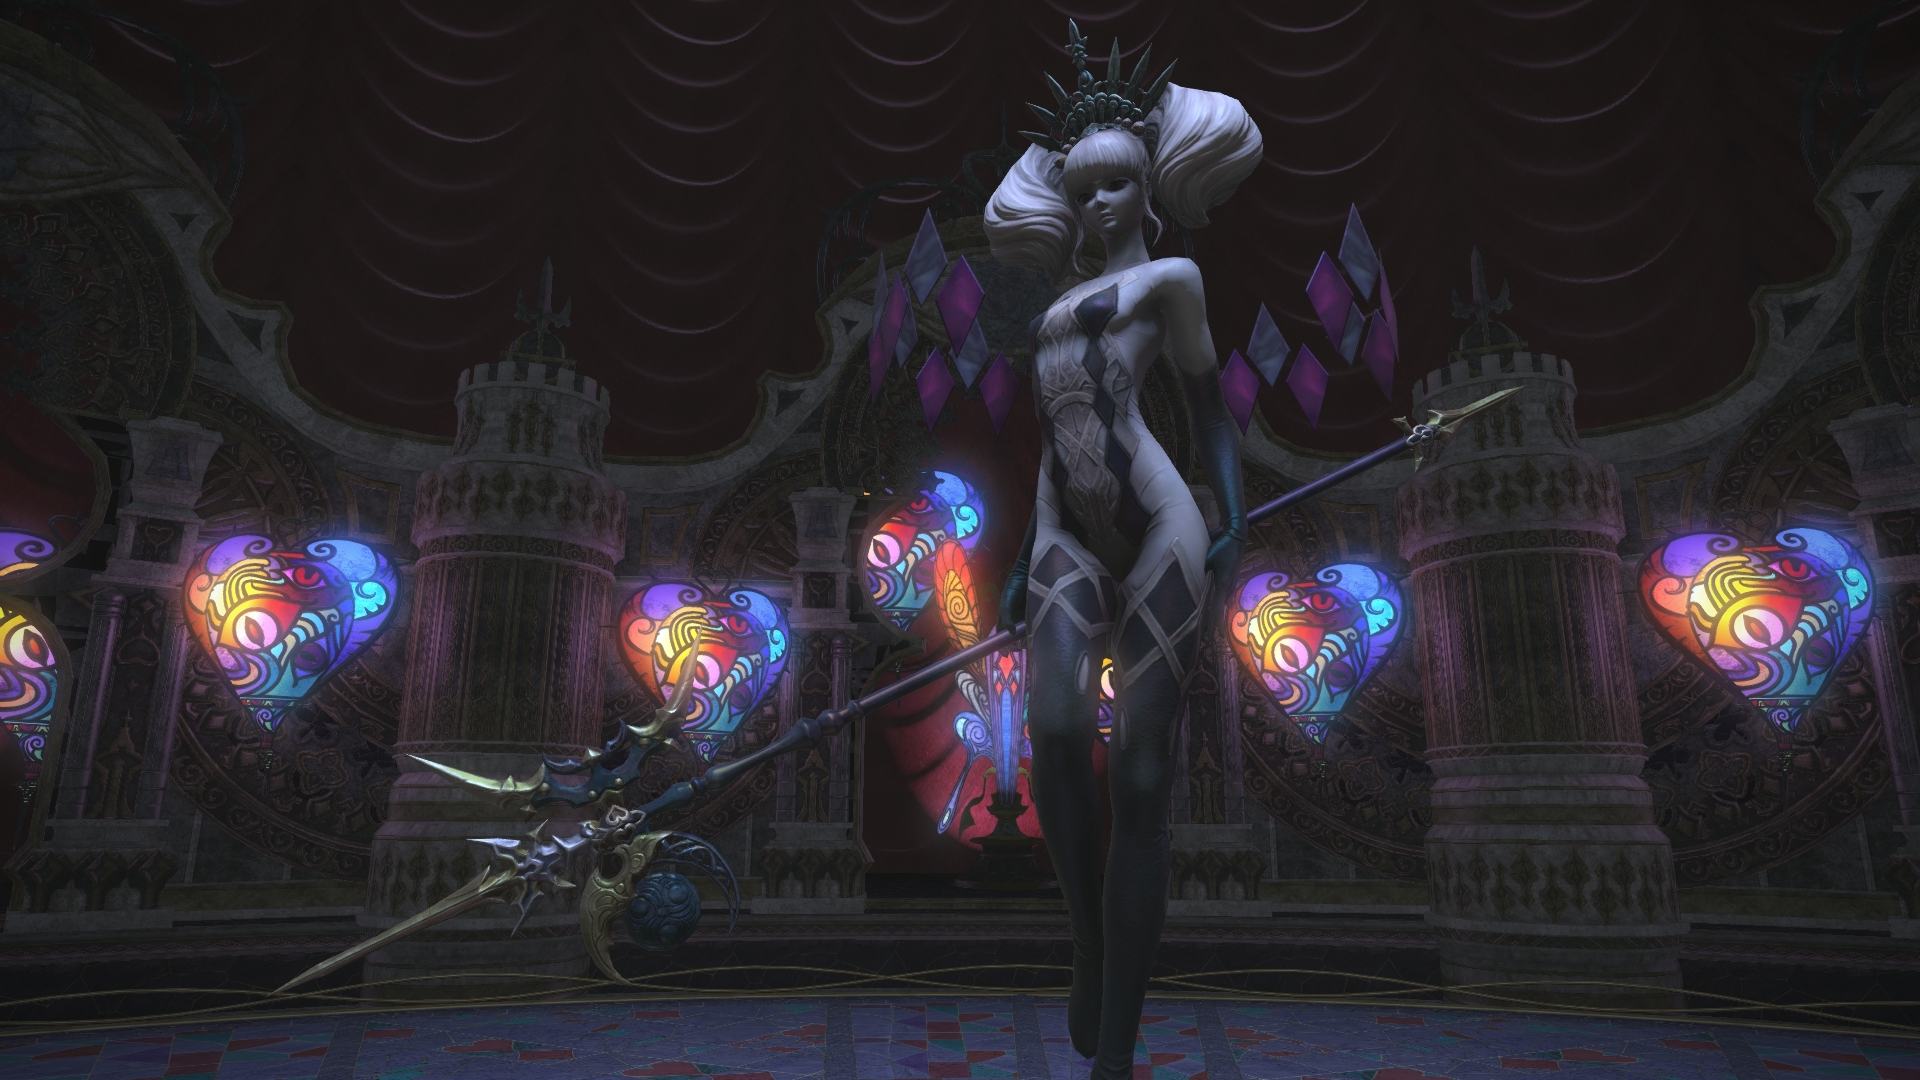 Final Fantasy XIV previews Dun Scaith and side stories.